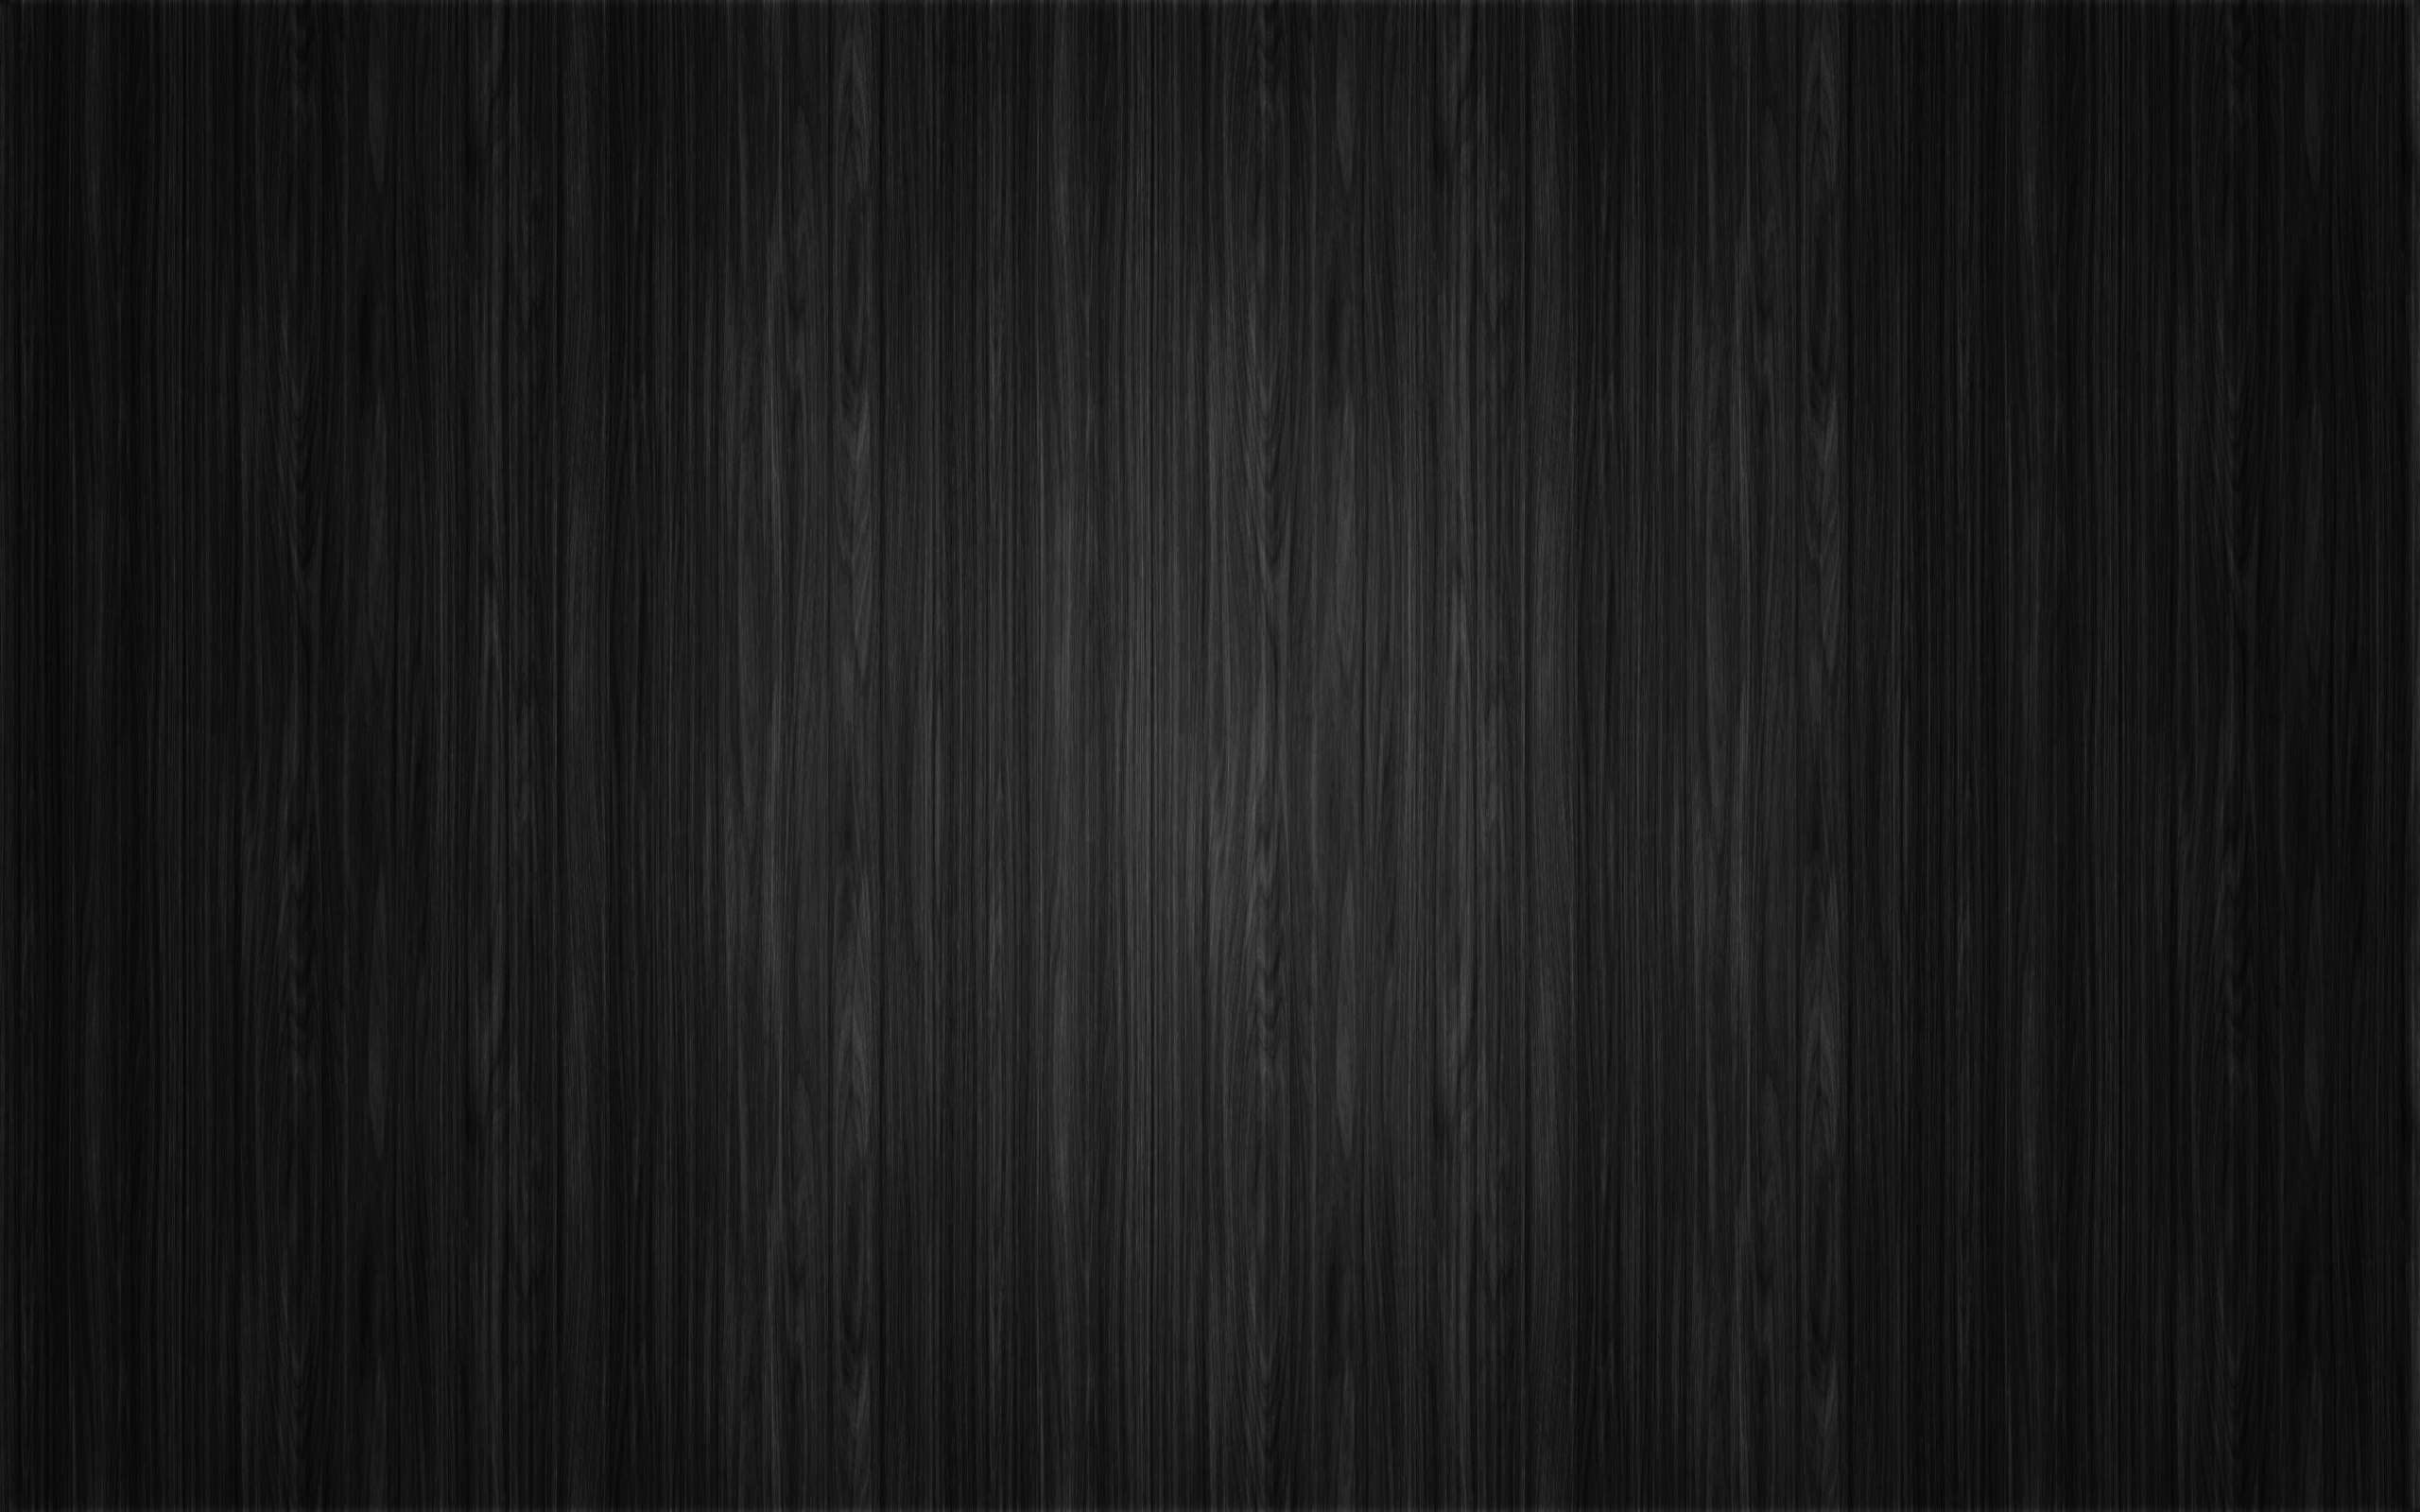 Ebony Parquet Wallpaper And Image Pictures Photos